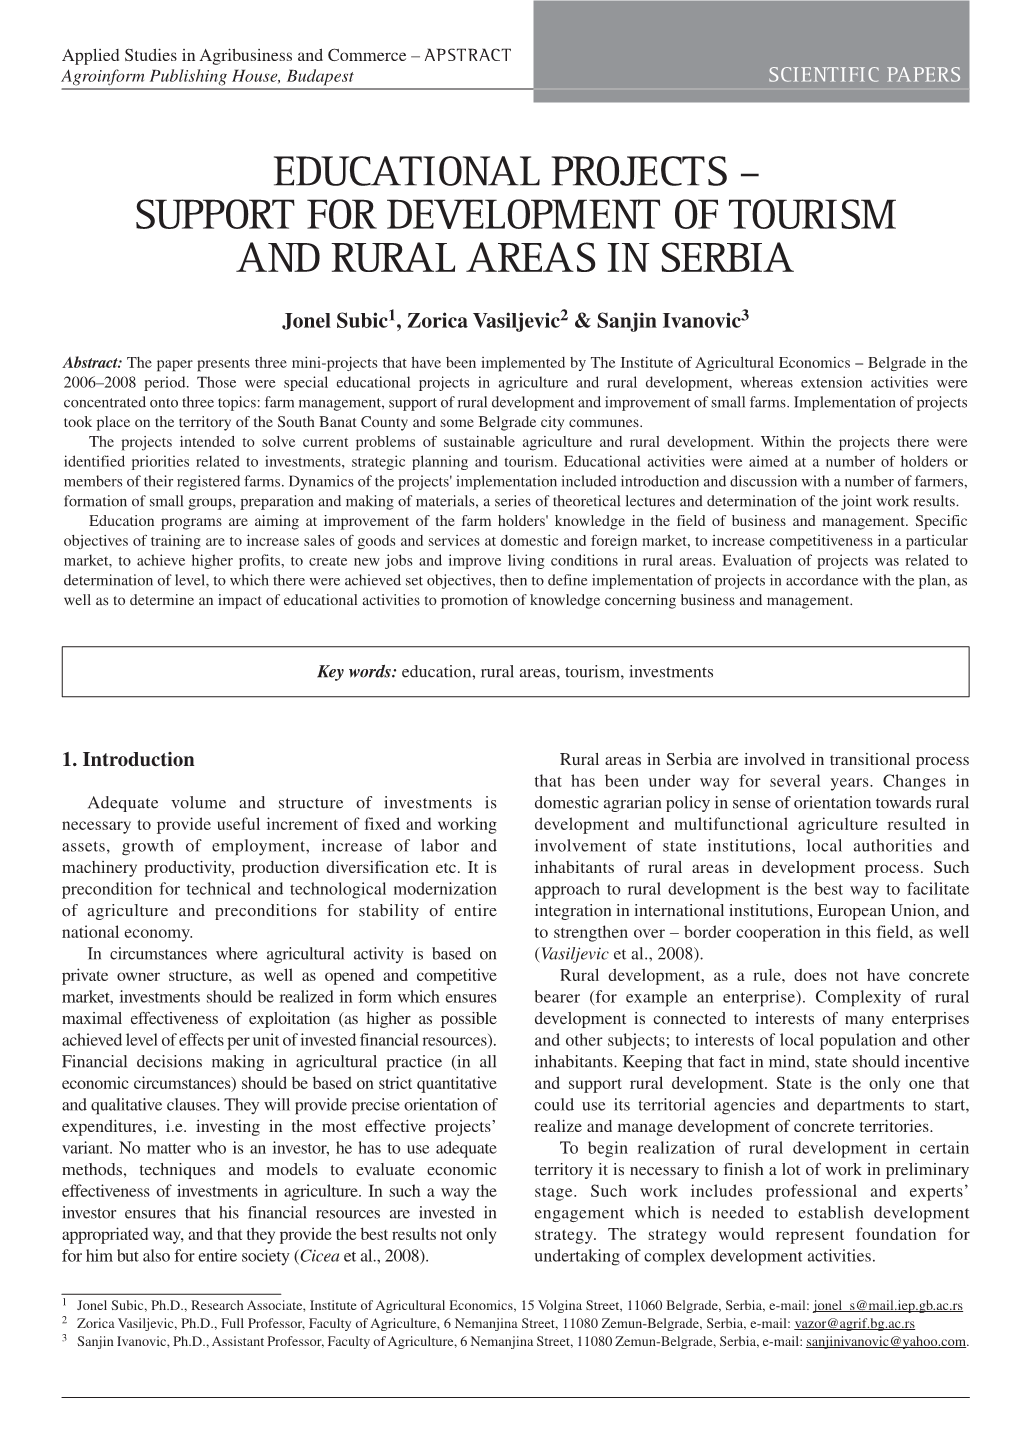 Educational Projects – Support for Development of Tourism and Rural Areas in Serbia